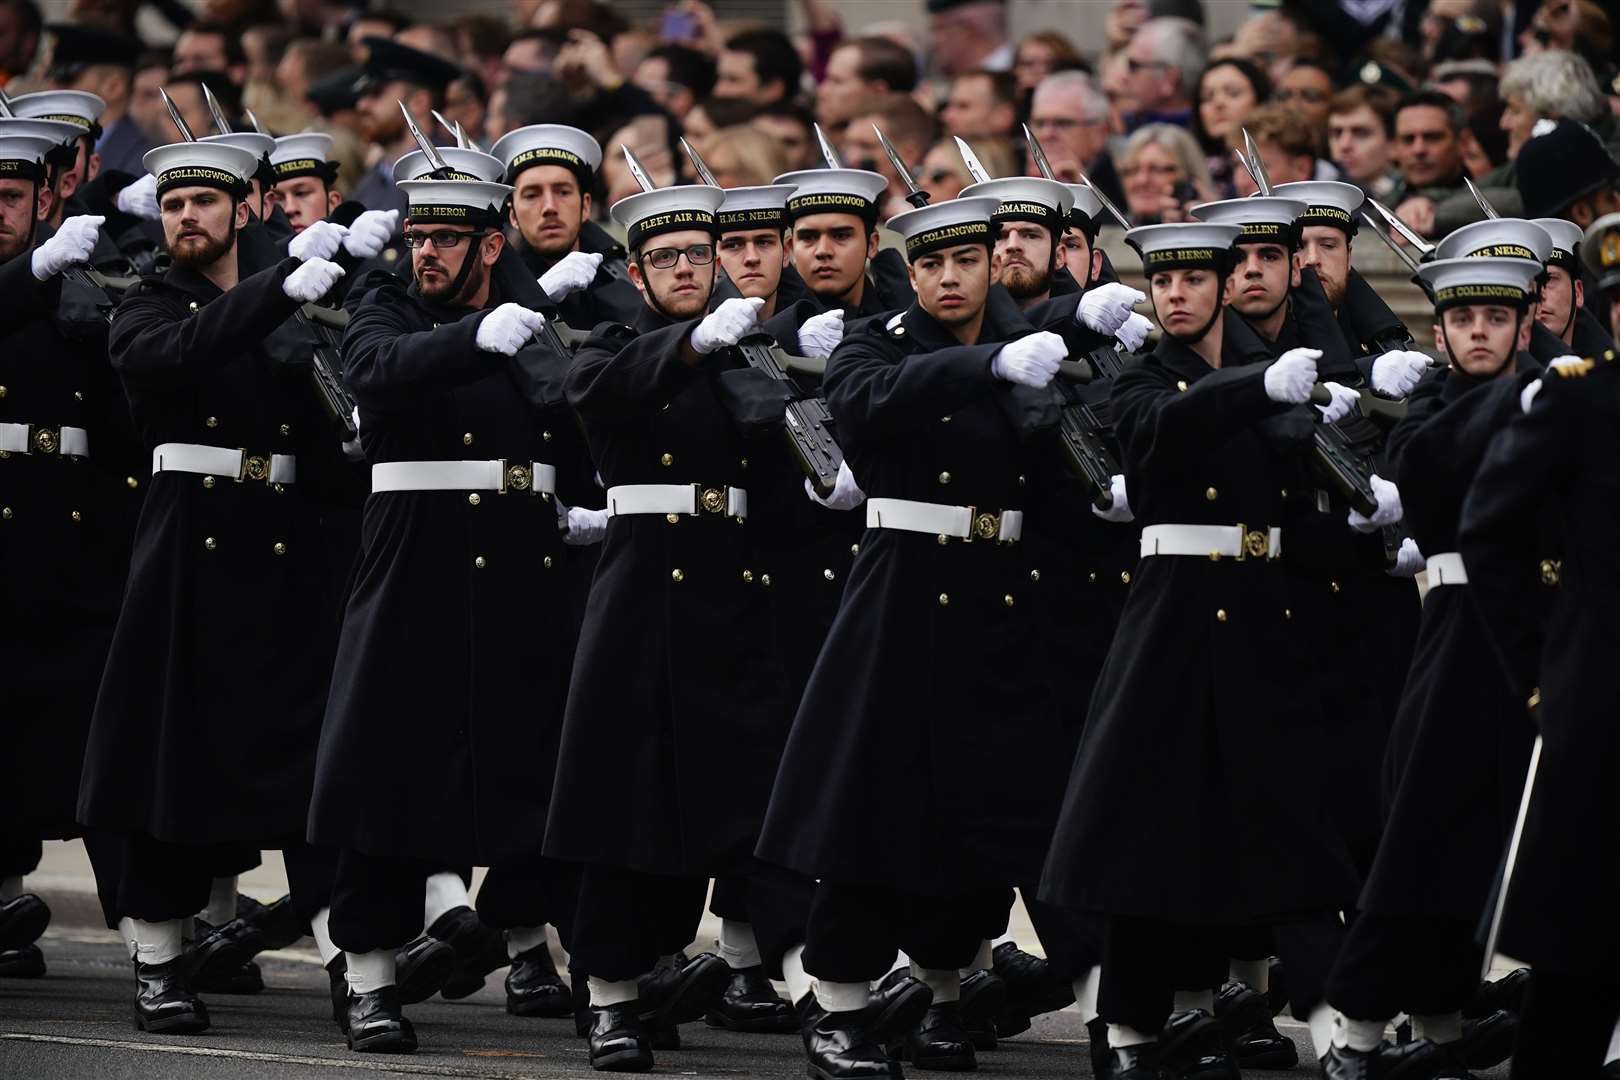 Service personnel arrive on Whitehall ahead of the Remembrance Sunday service at the Cenotaph (Aaron Chown/PA)